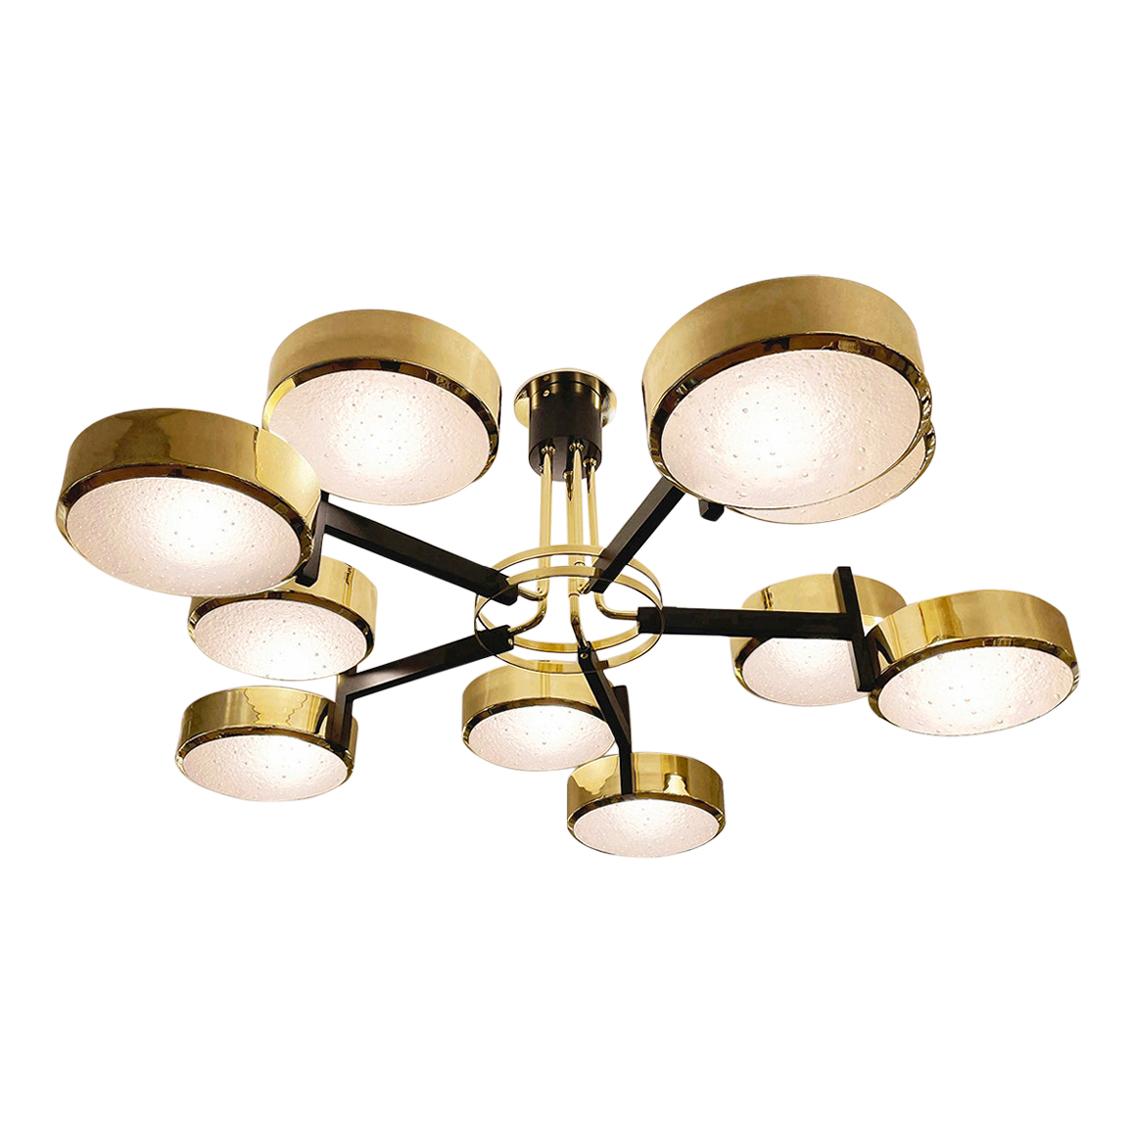 Eclissi Grande Ceiling Light by Gaspare Asaro. Murano Glass Version